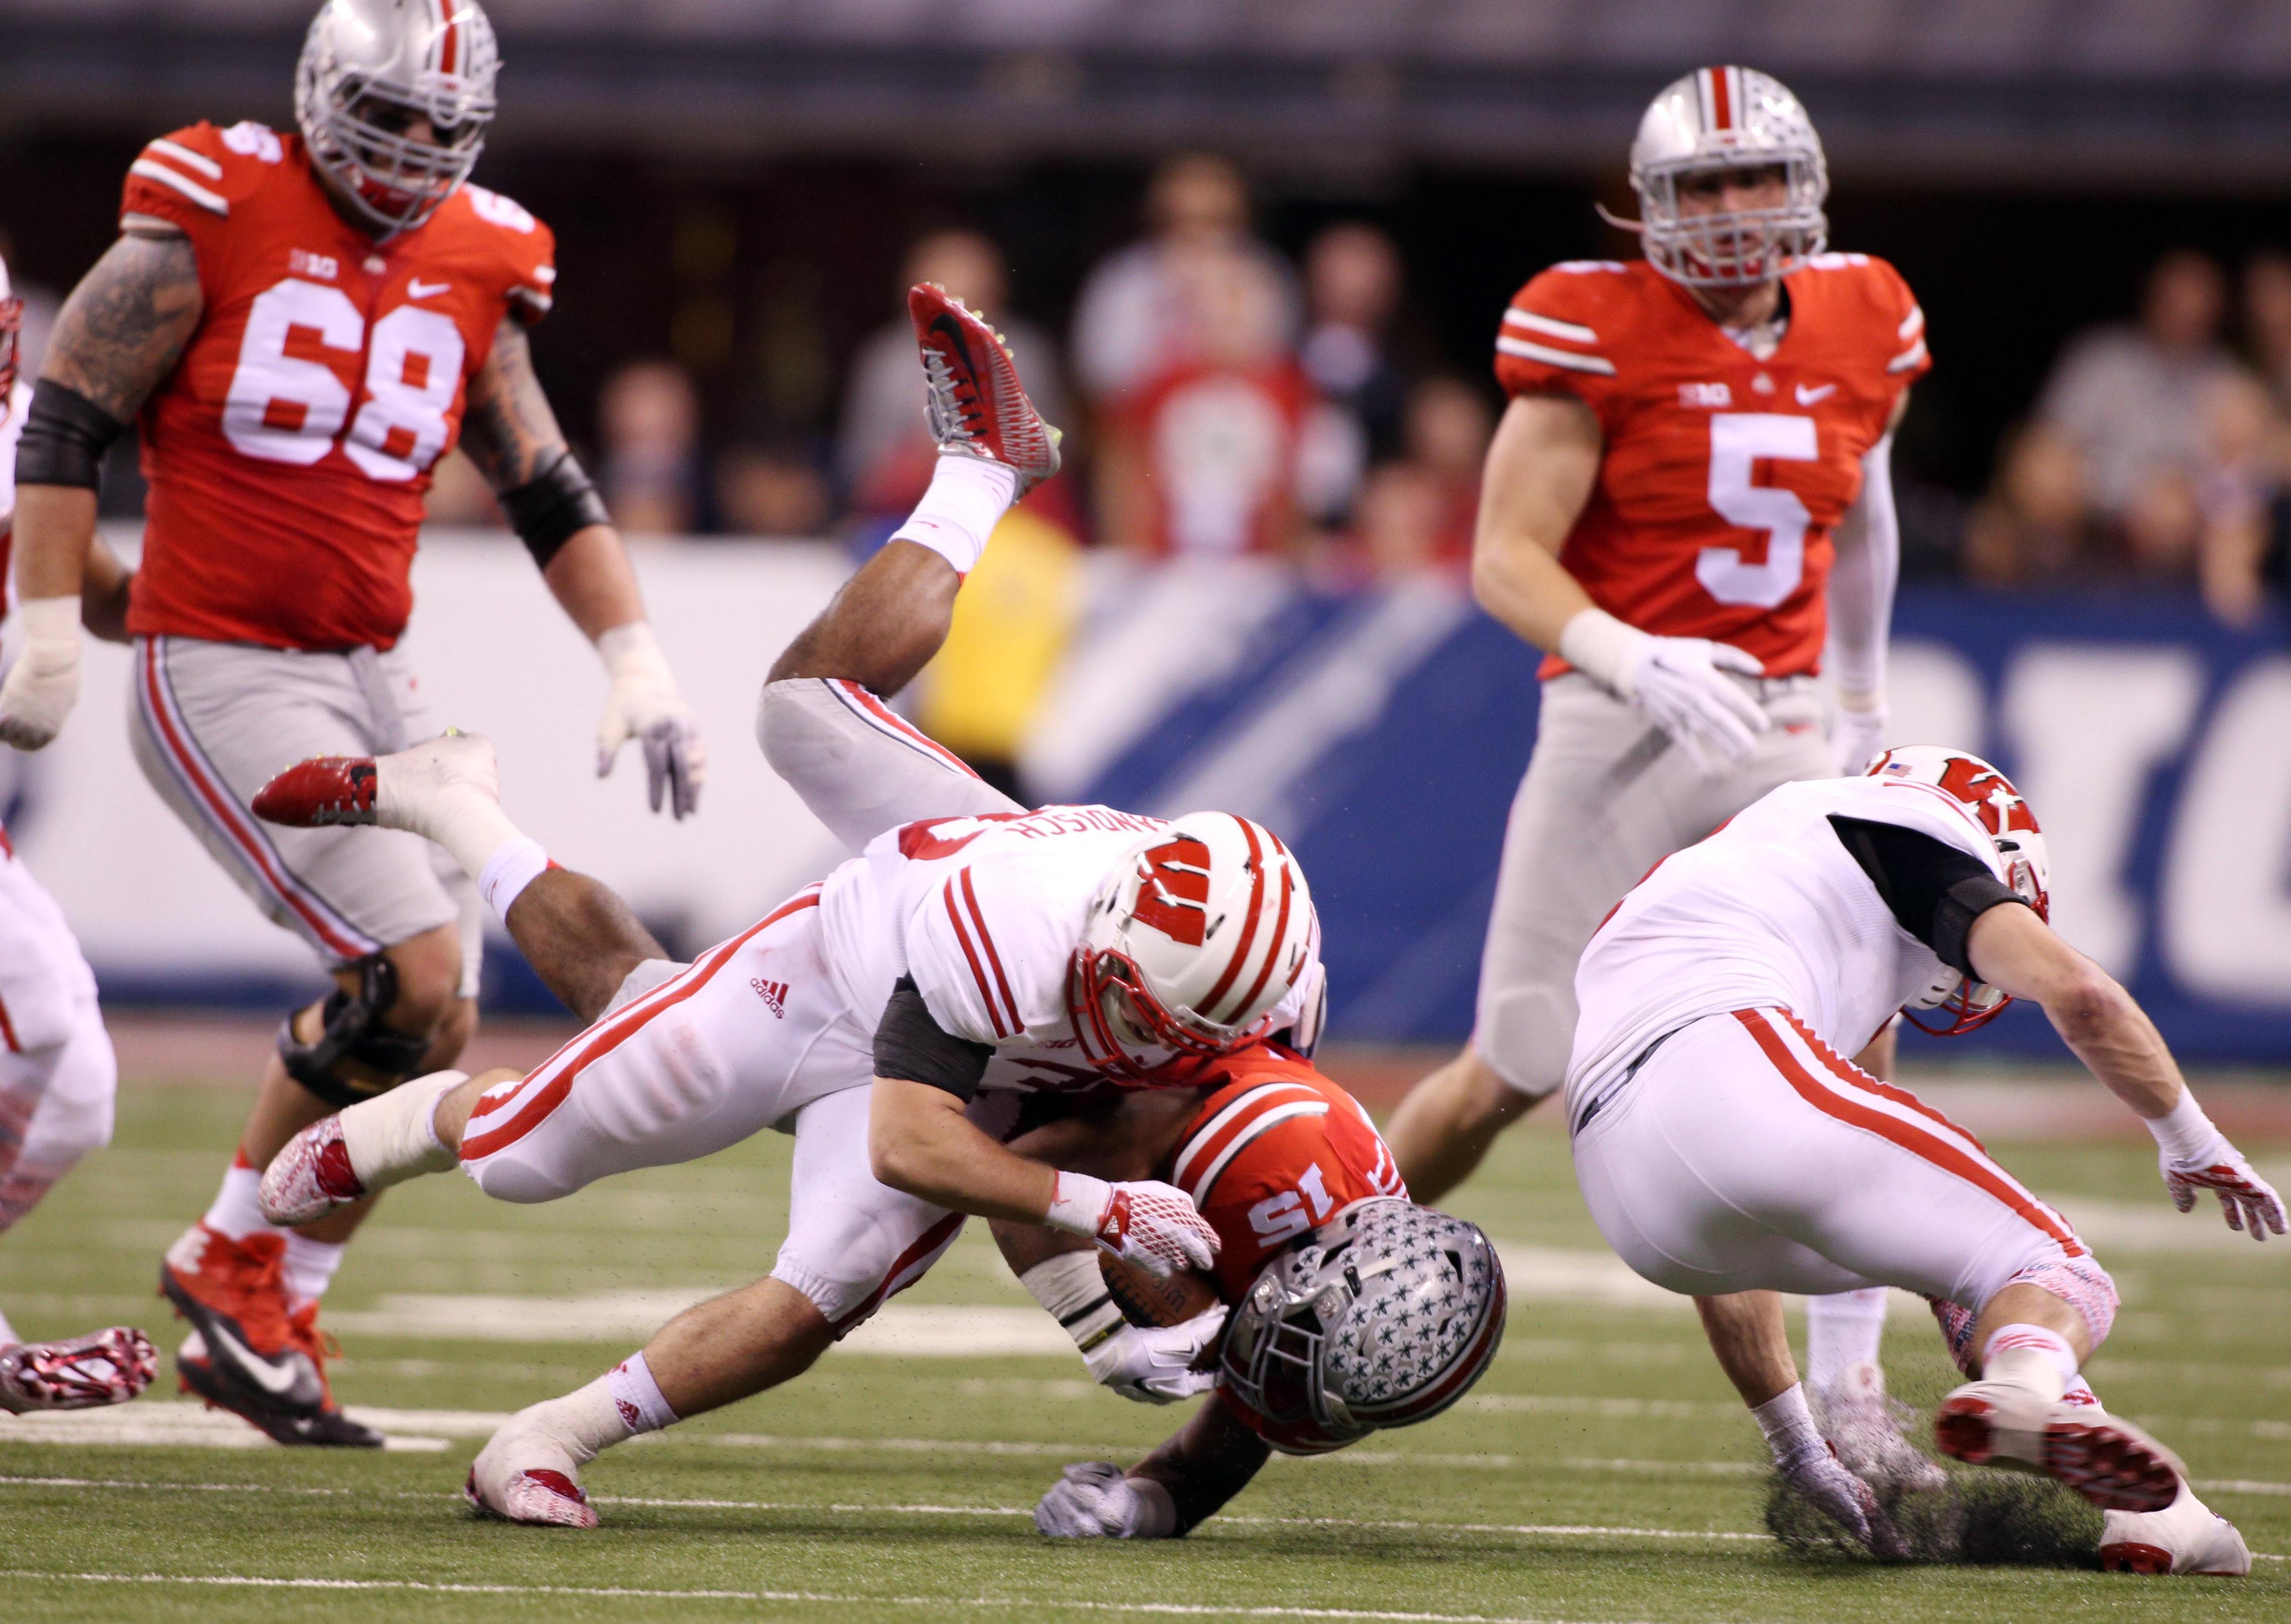 Photos Ohio State vs. Wisconsin in the Big Ten Football Championship